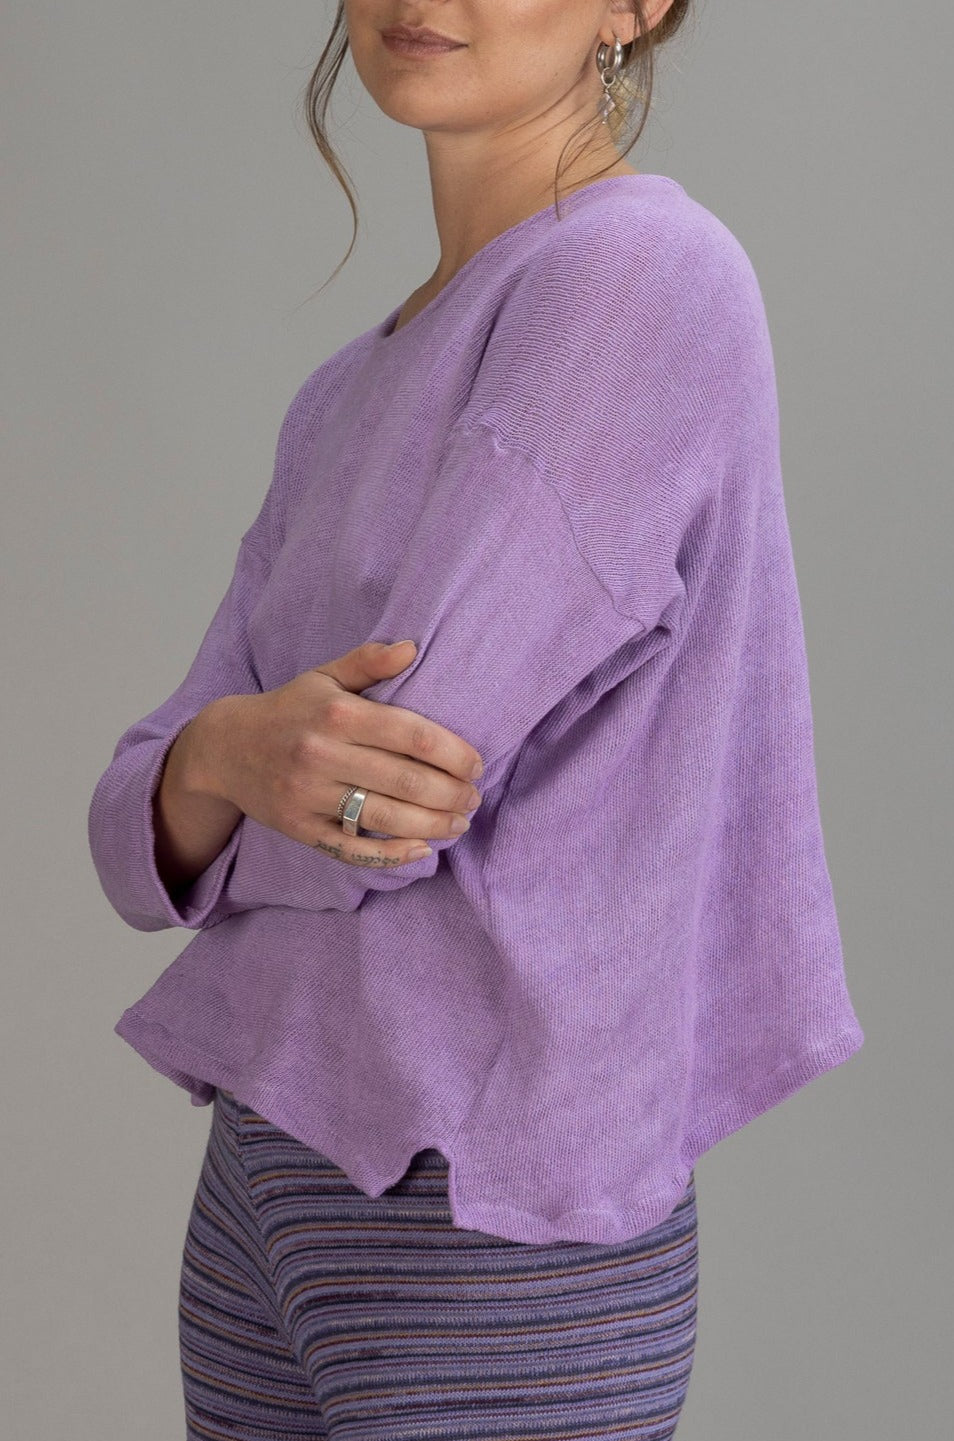 WEDNESDAY SWEATER  - Lilac